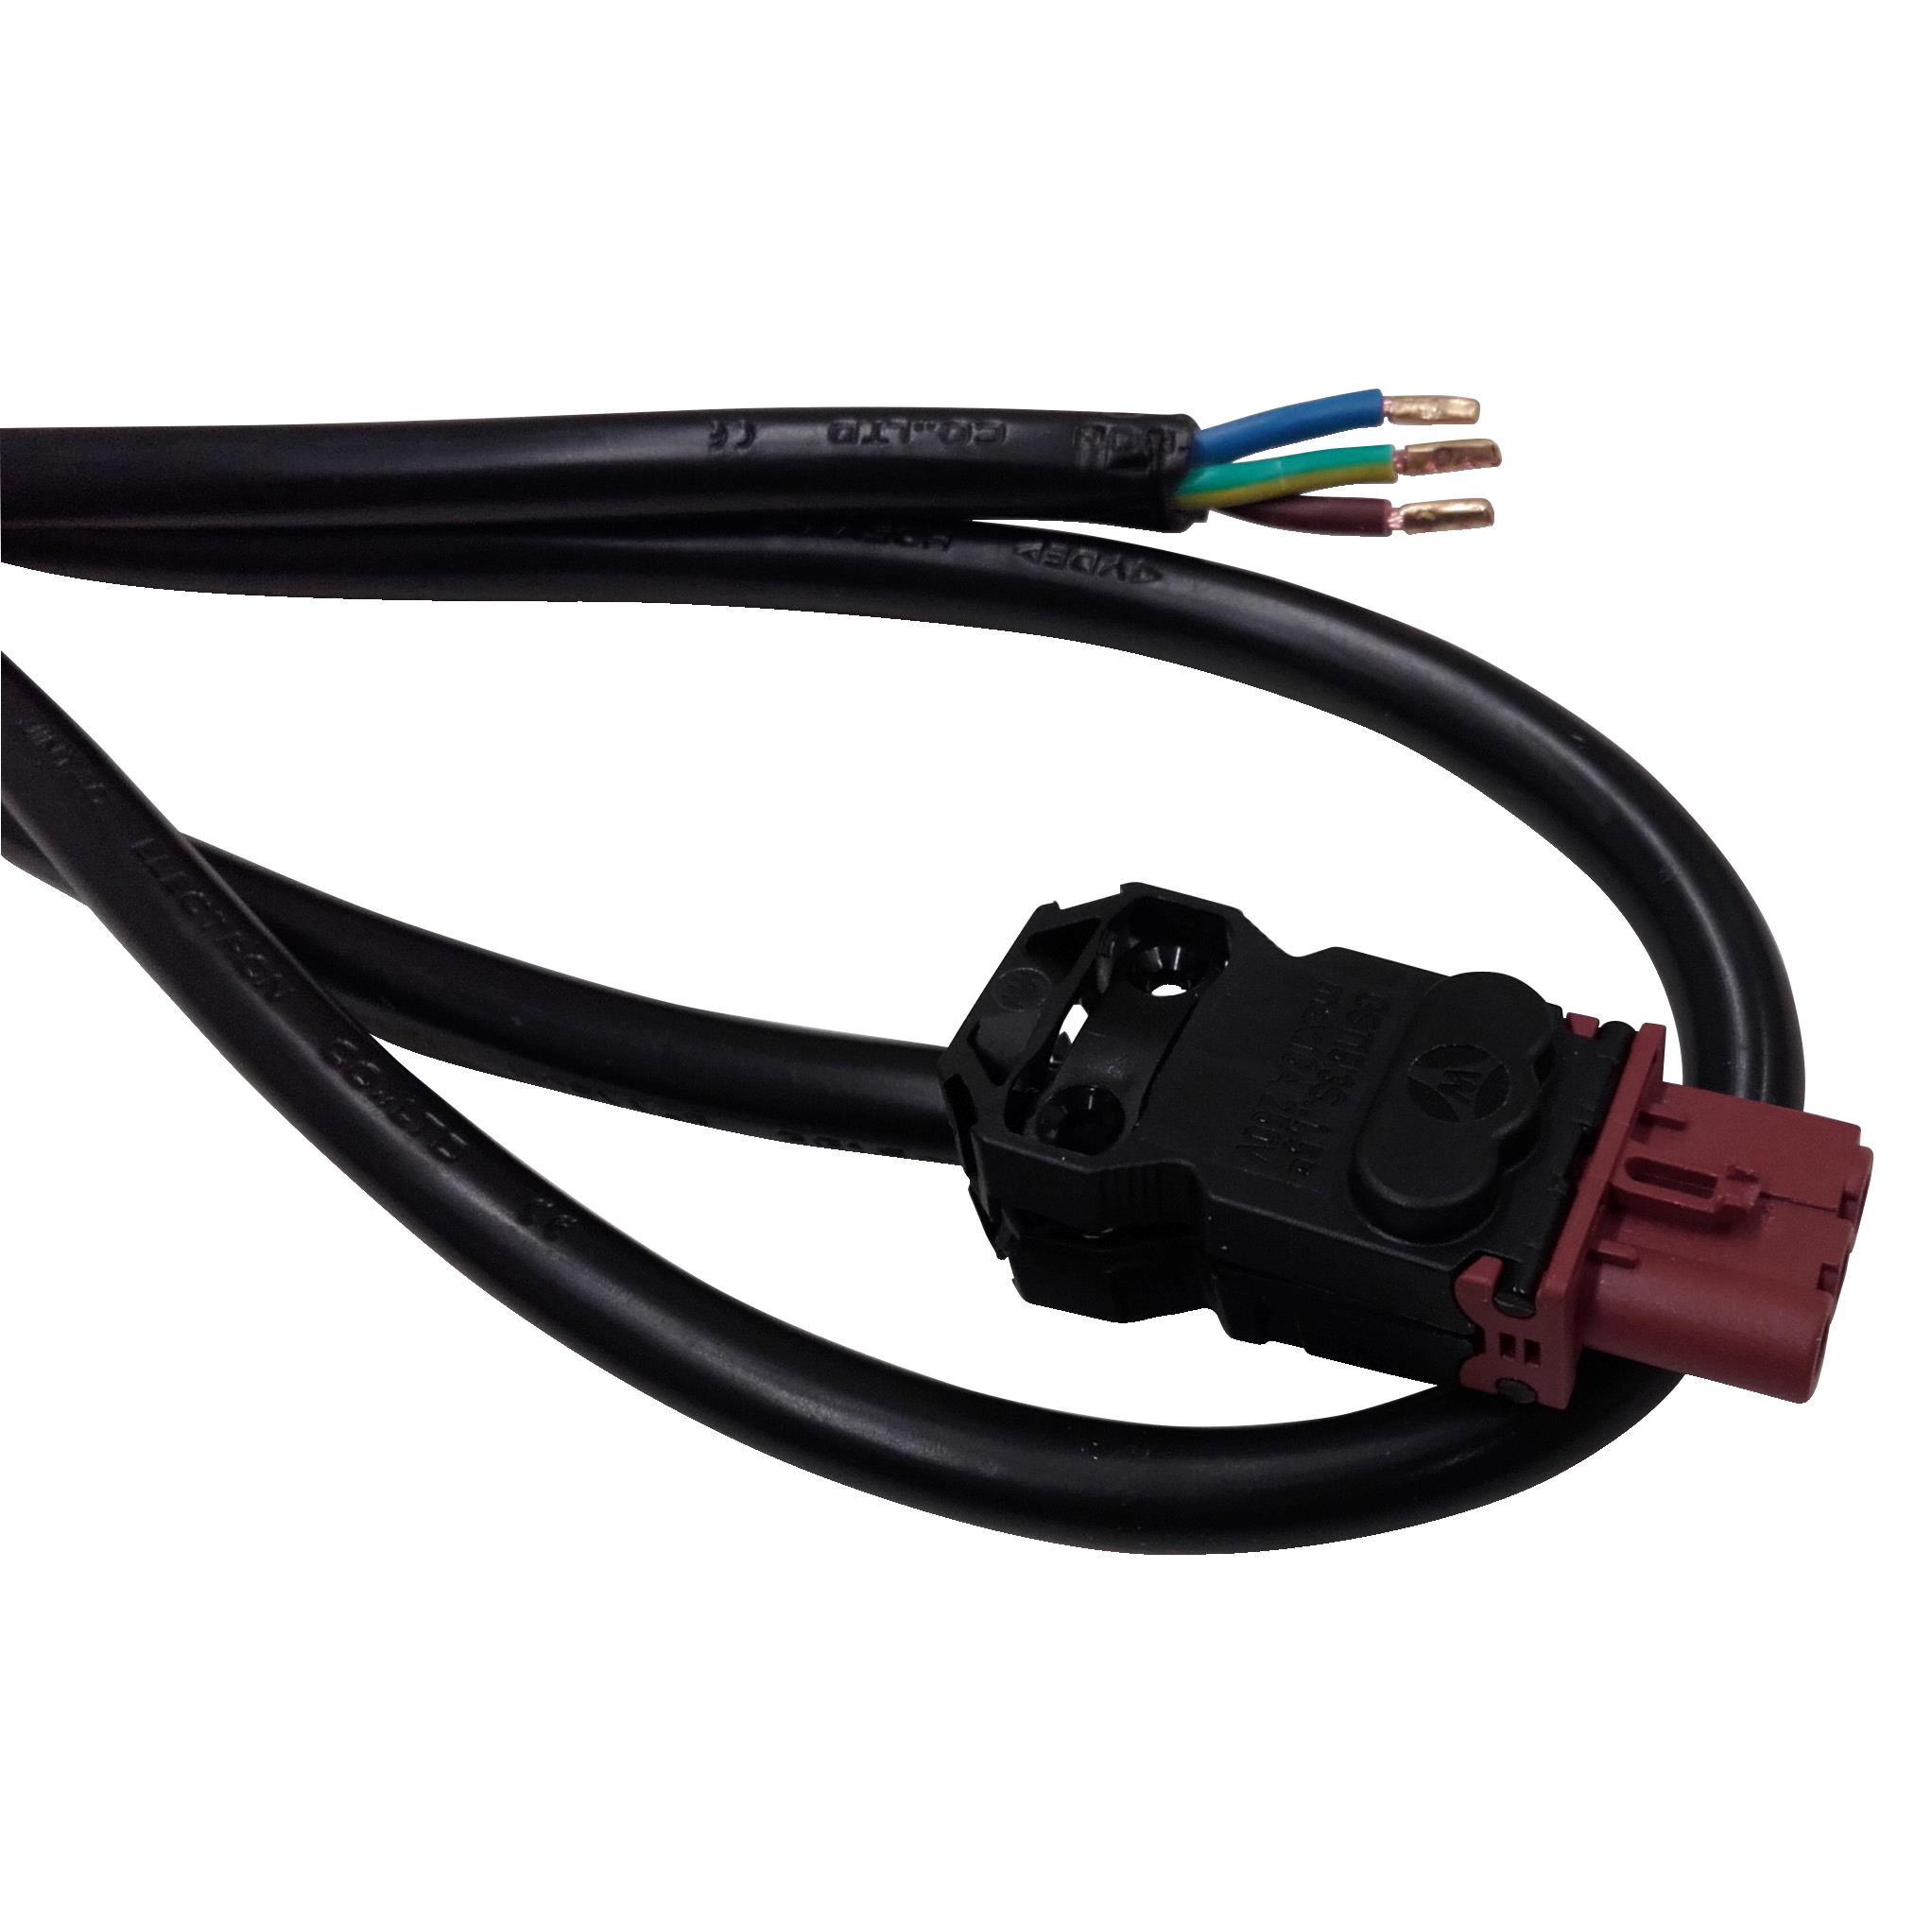 【NSYLAM3MDC】3M CABLE FOR VDC IEC LED LAMPS M